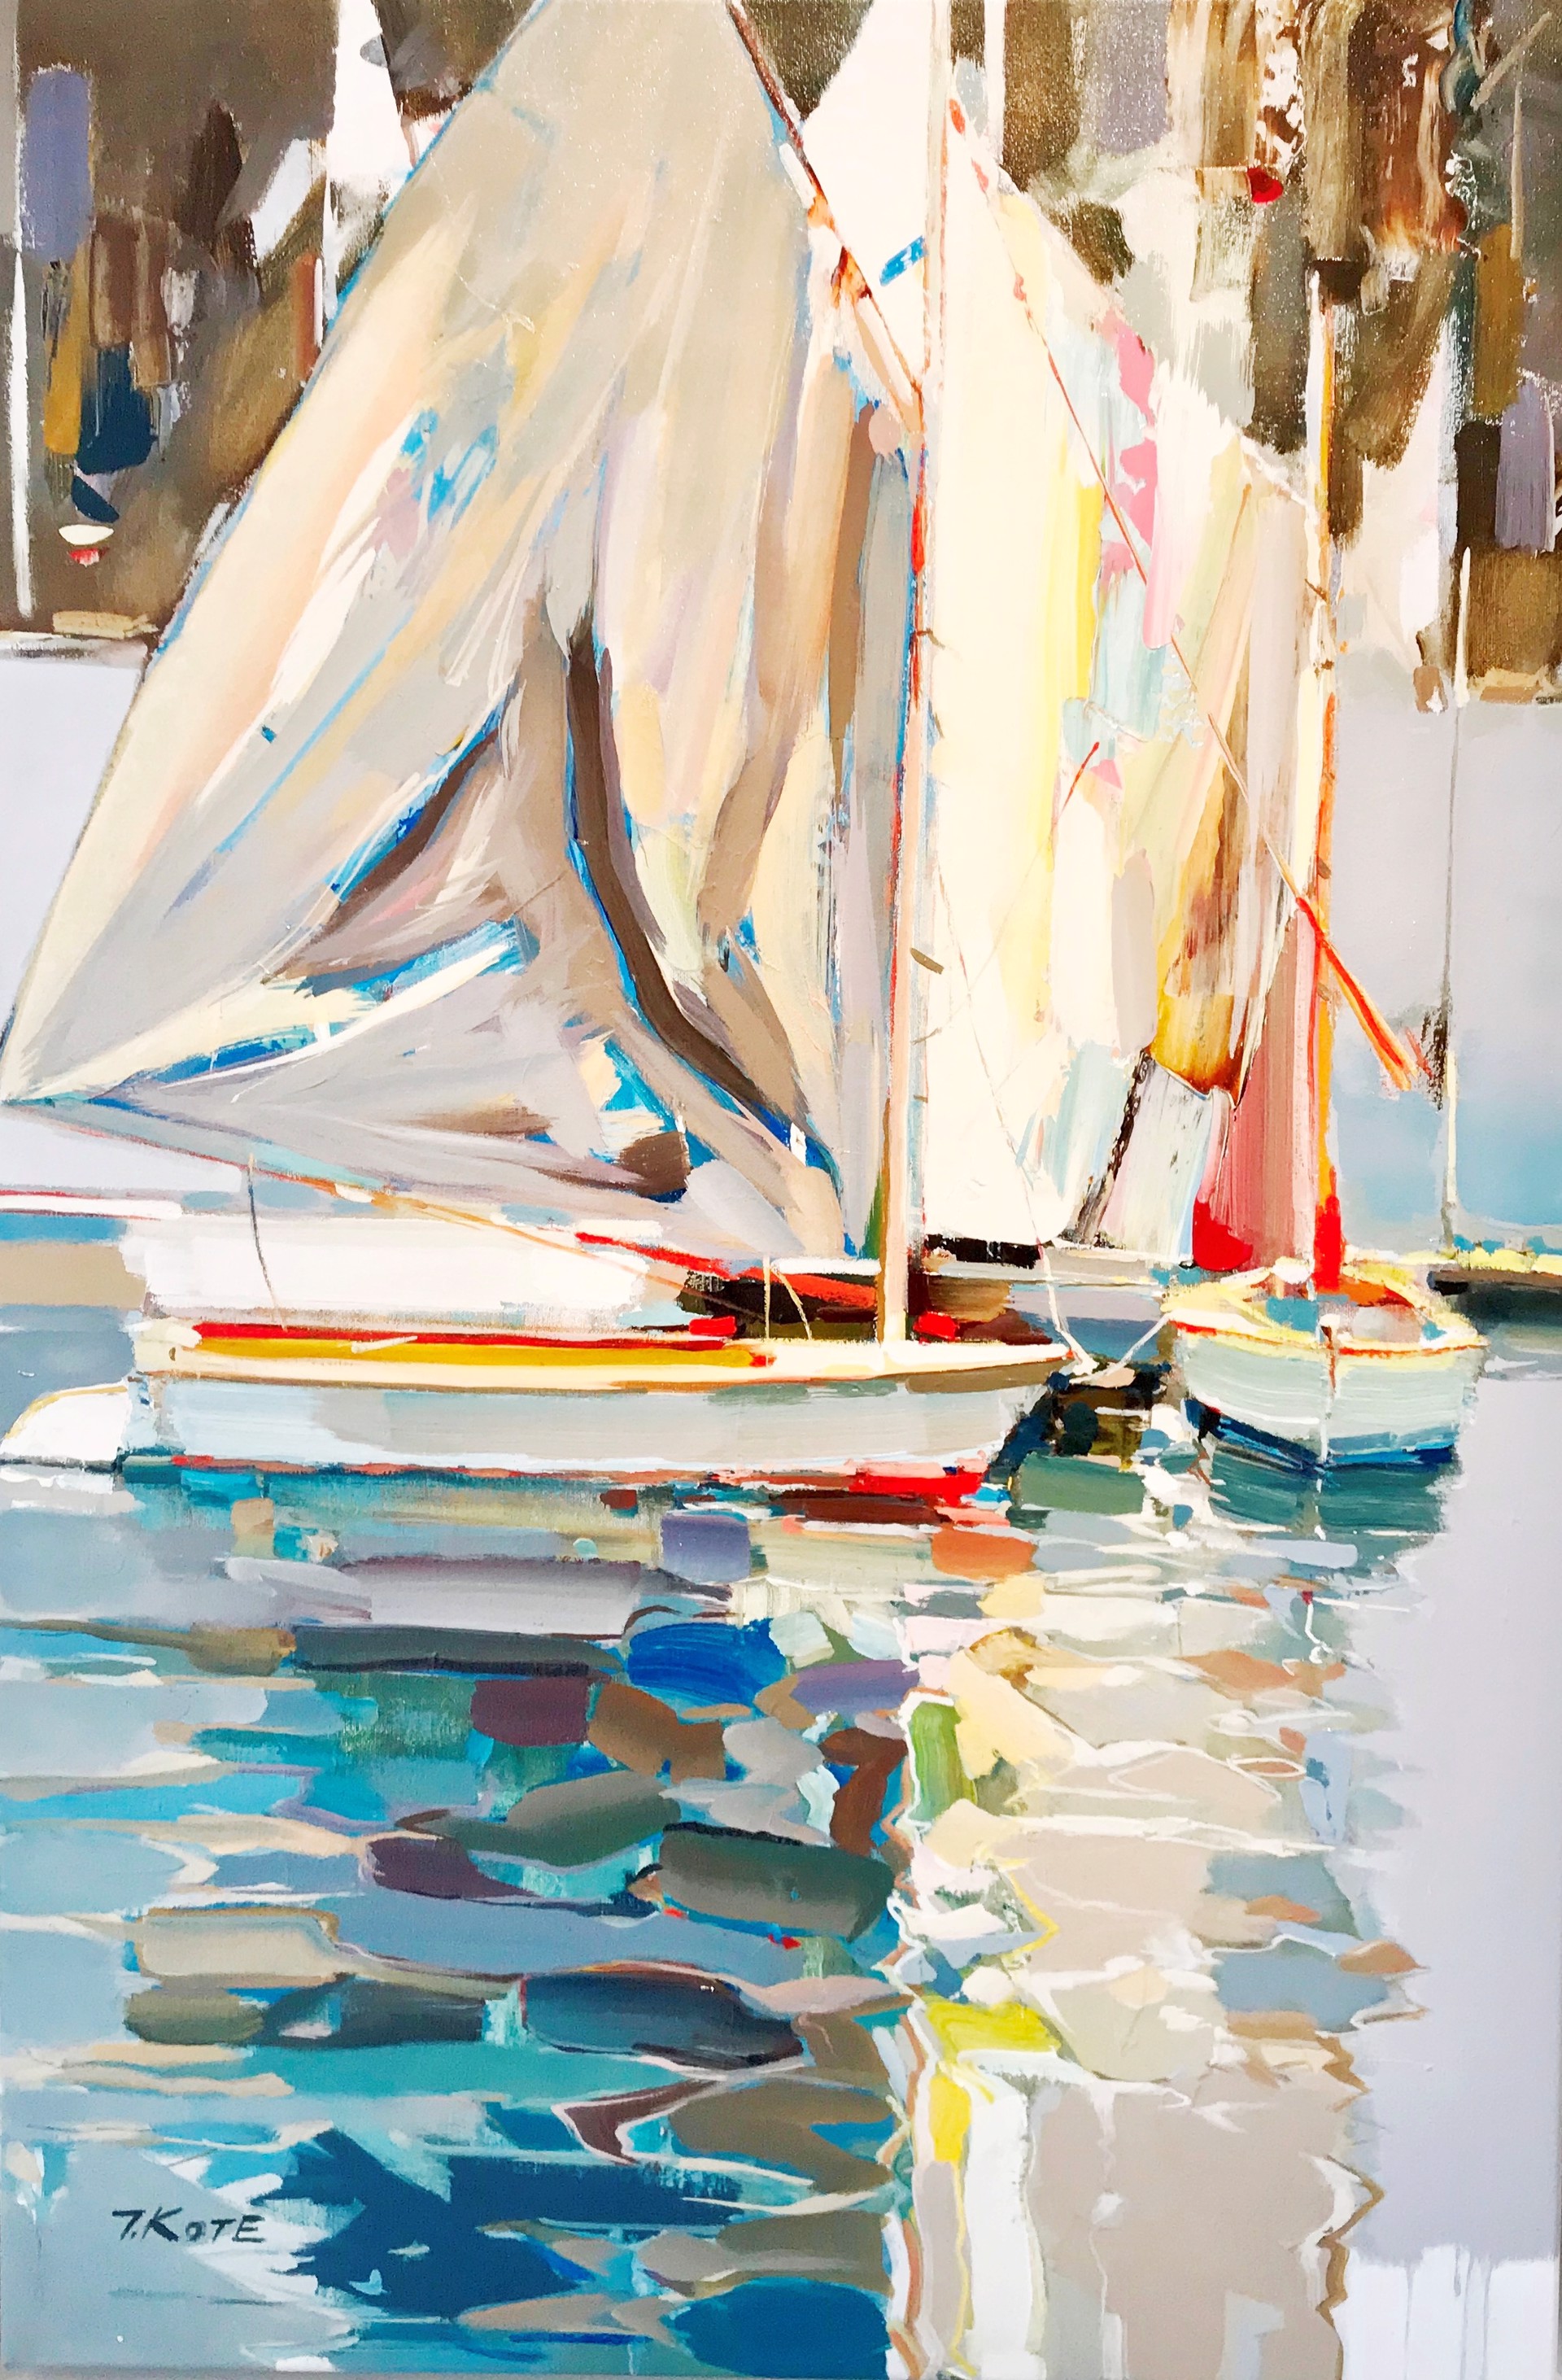 Tranquil Day by Josef Kote